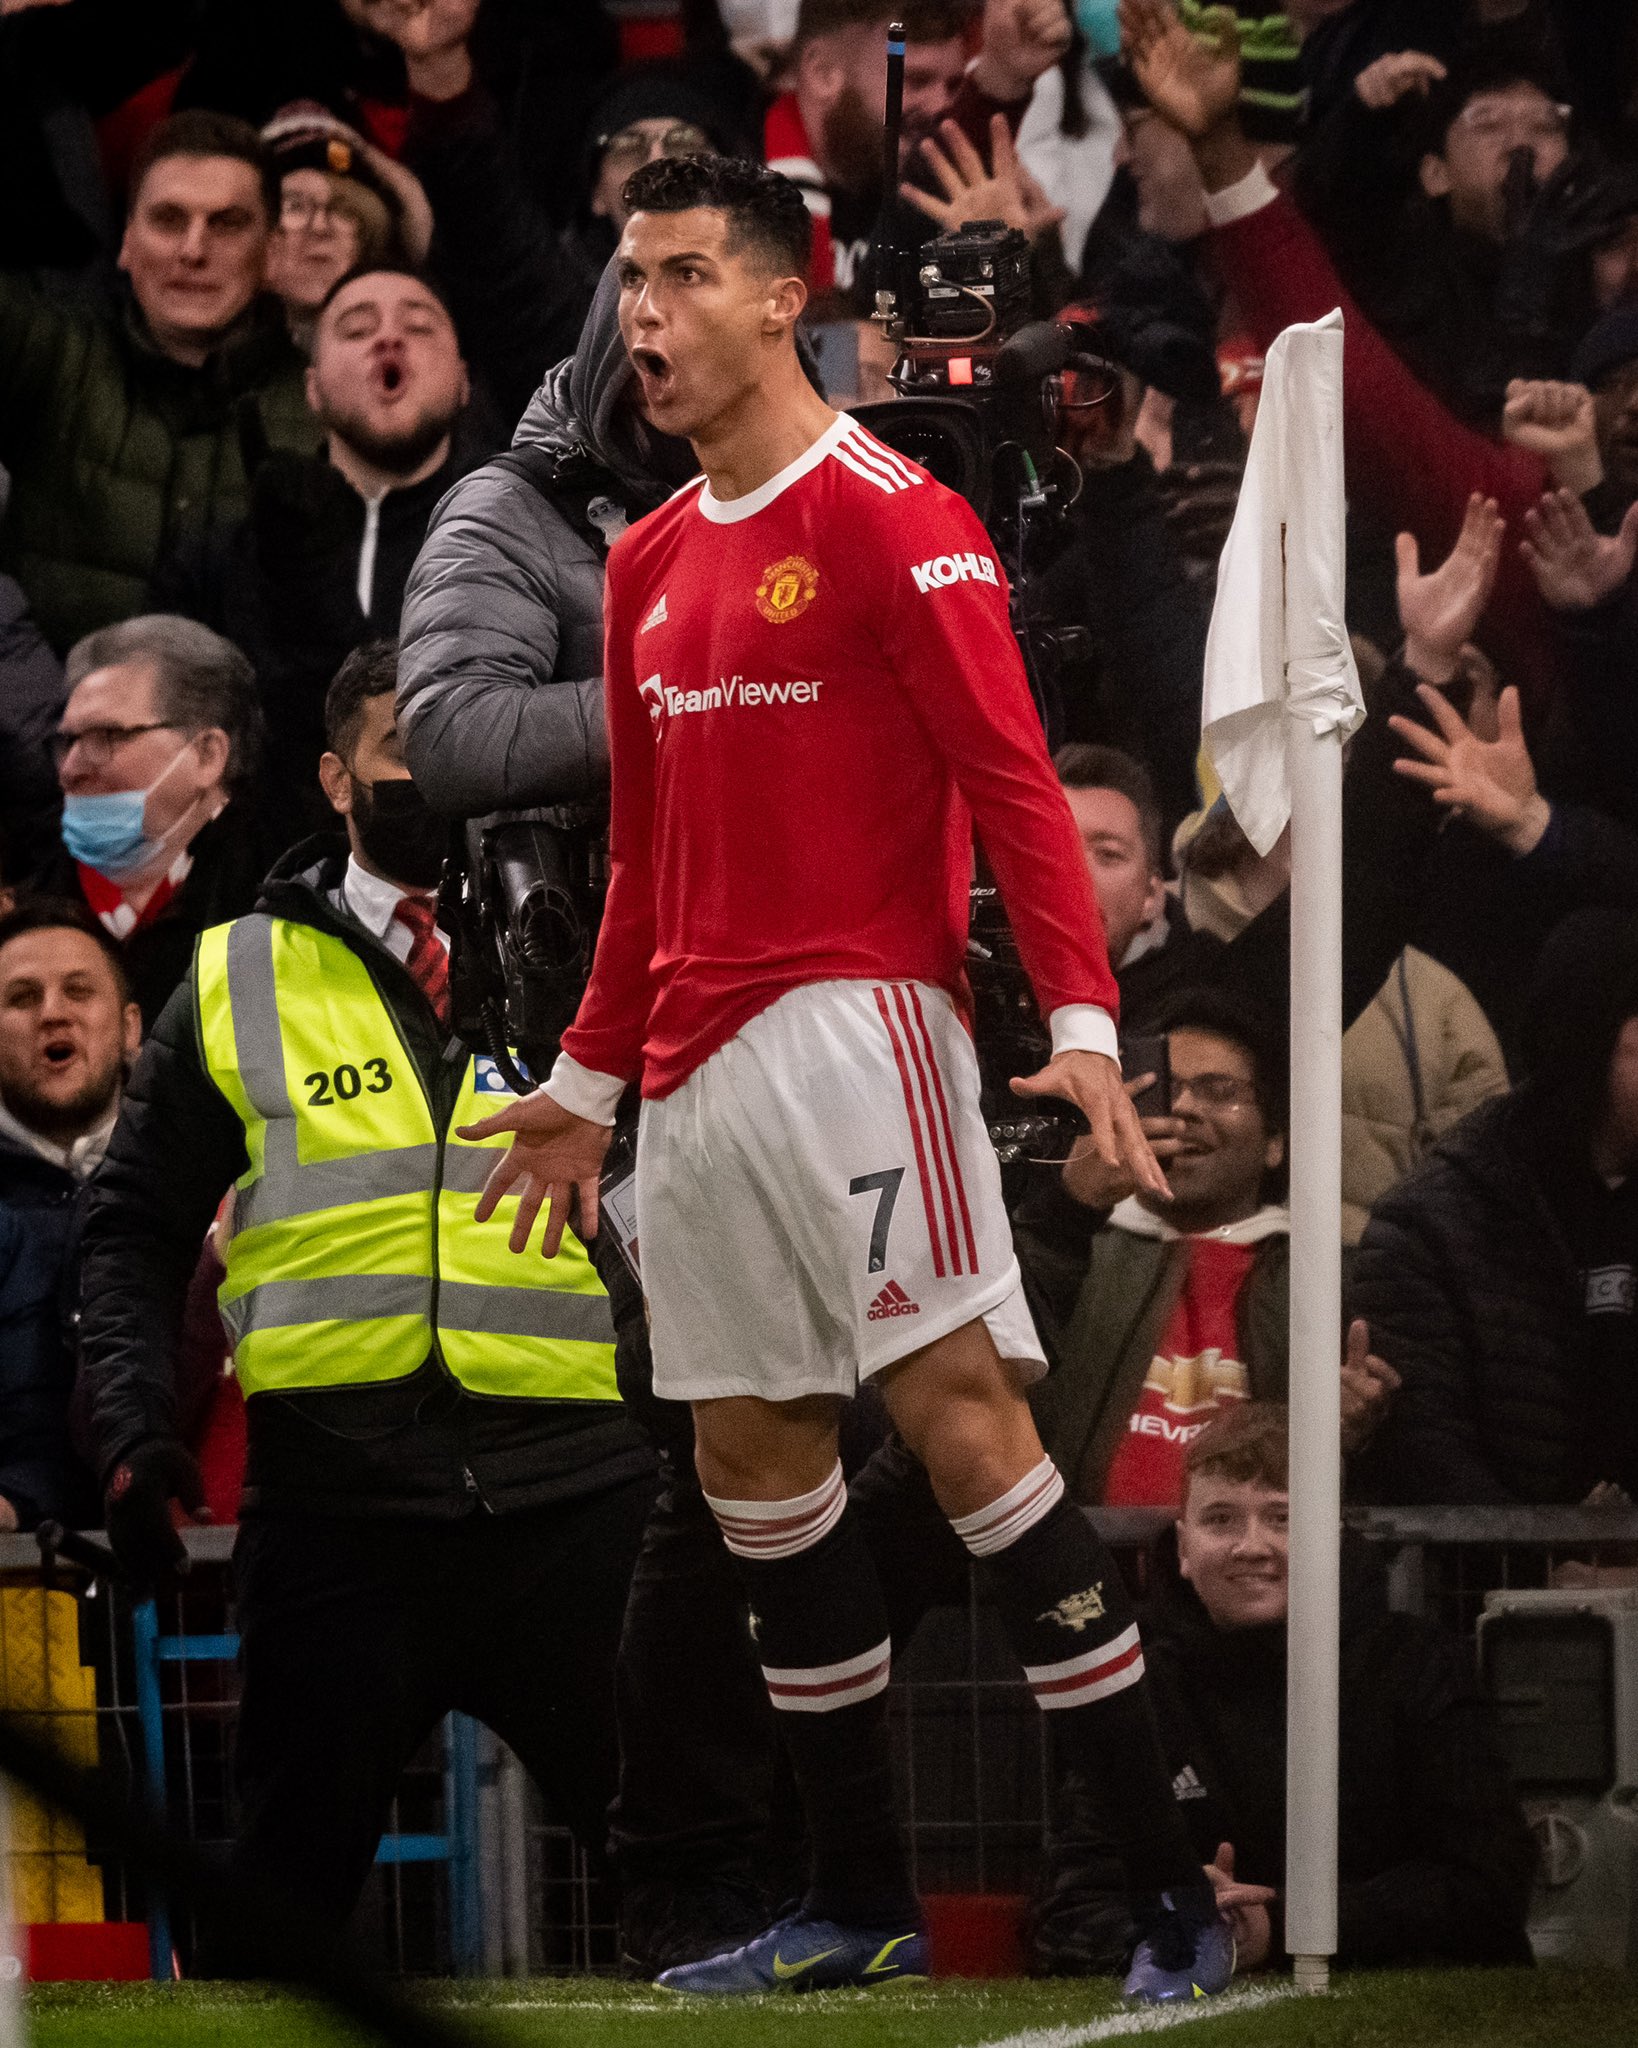 Manchester United vs Arsenal: Cristiano Ronaldo creates history with 801st goal, Man United beat Arsenal 3-2 in a stunning comeback